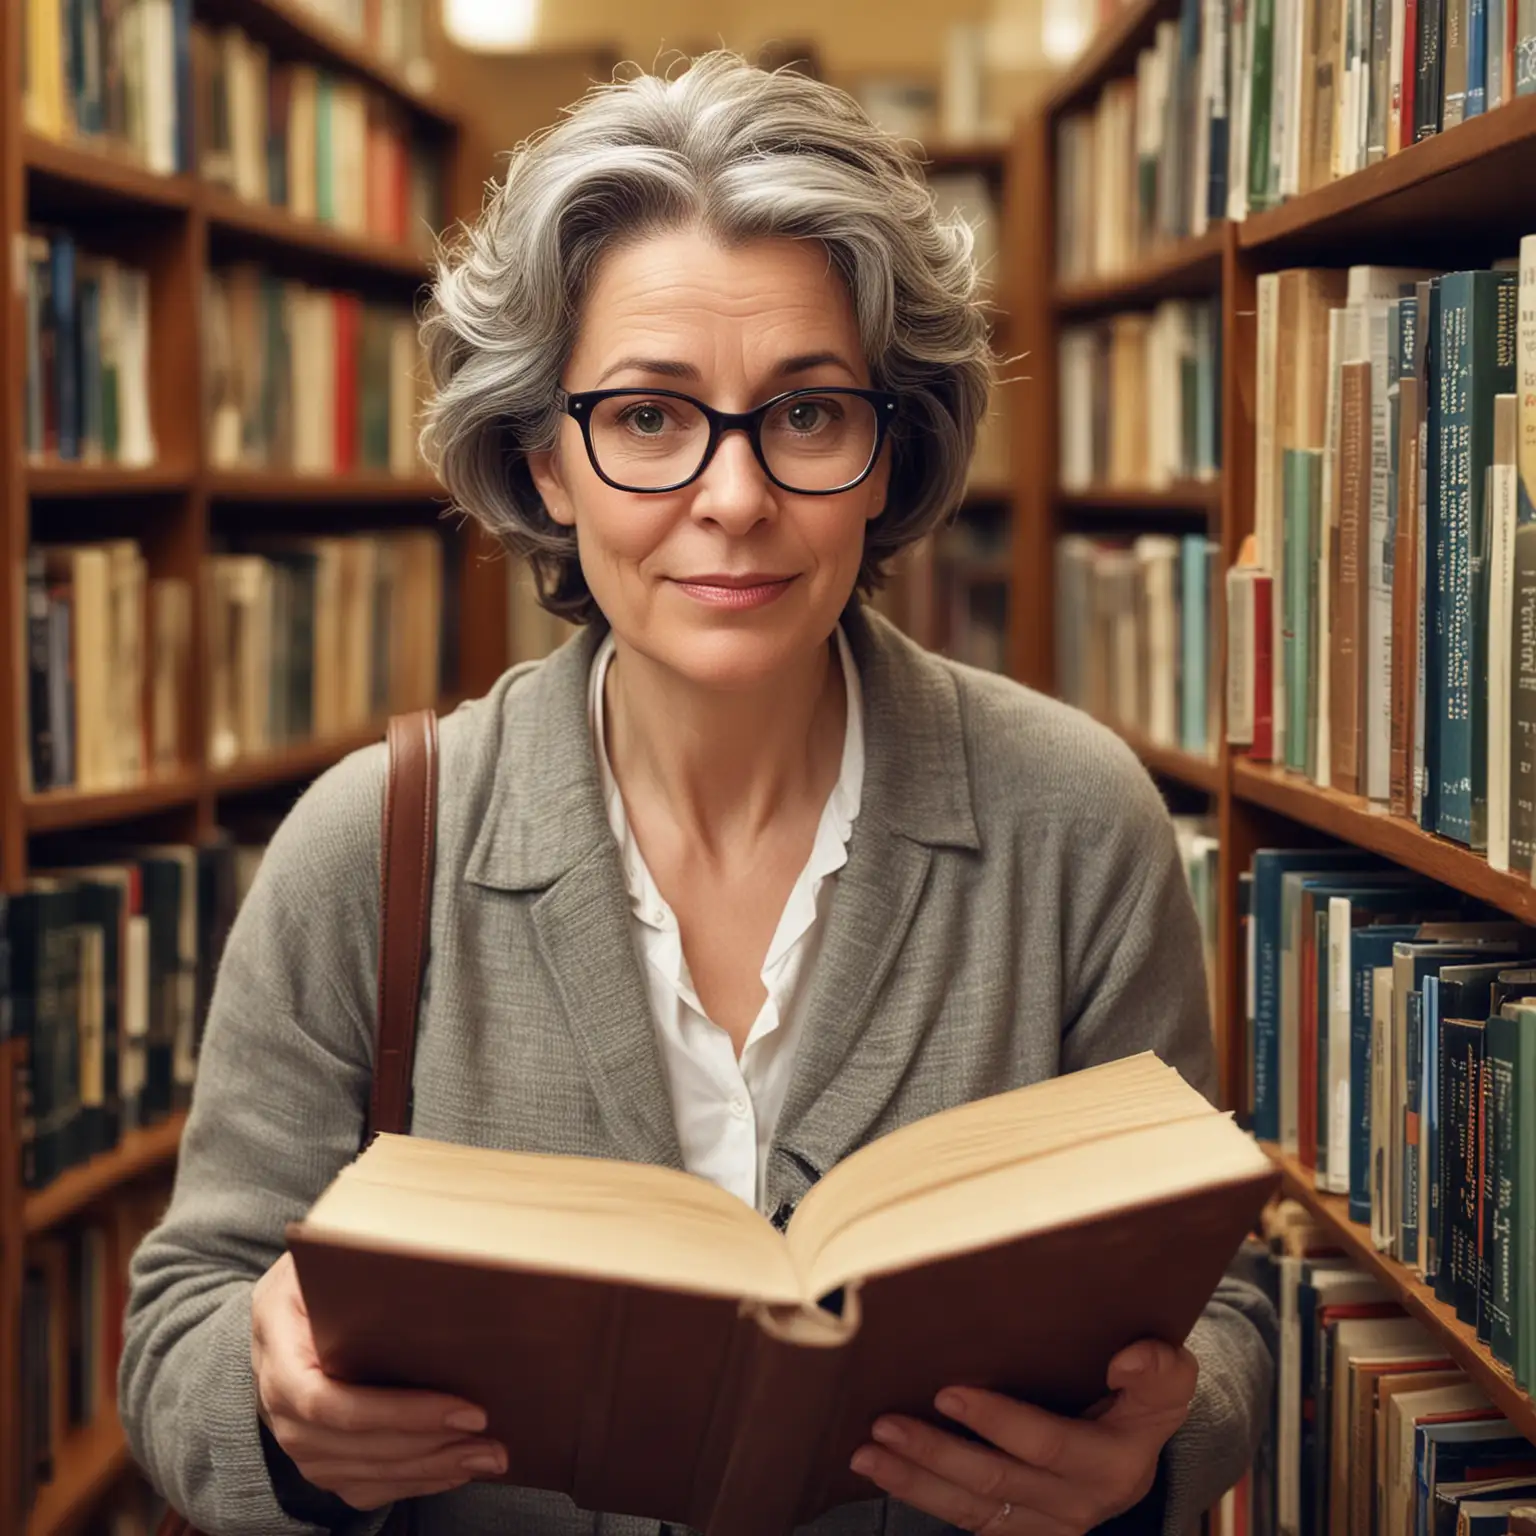 MiddleAged Woman Surrounded by Books in a Cozy Library Setting